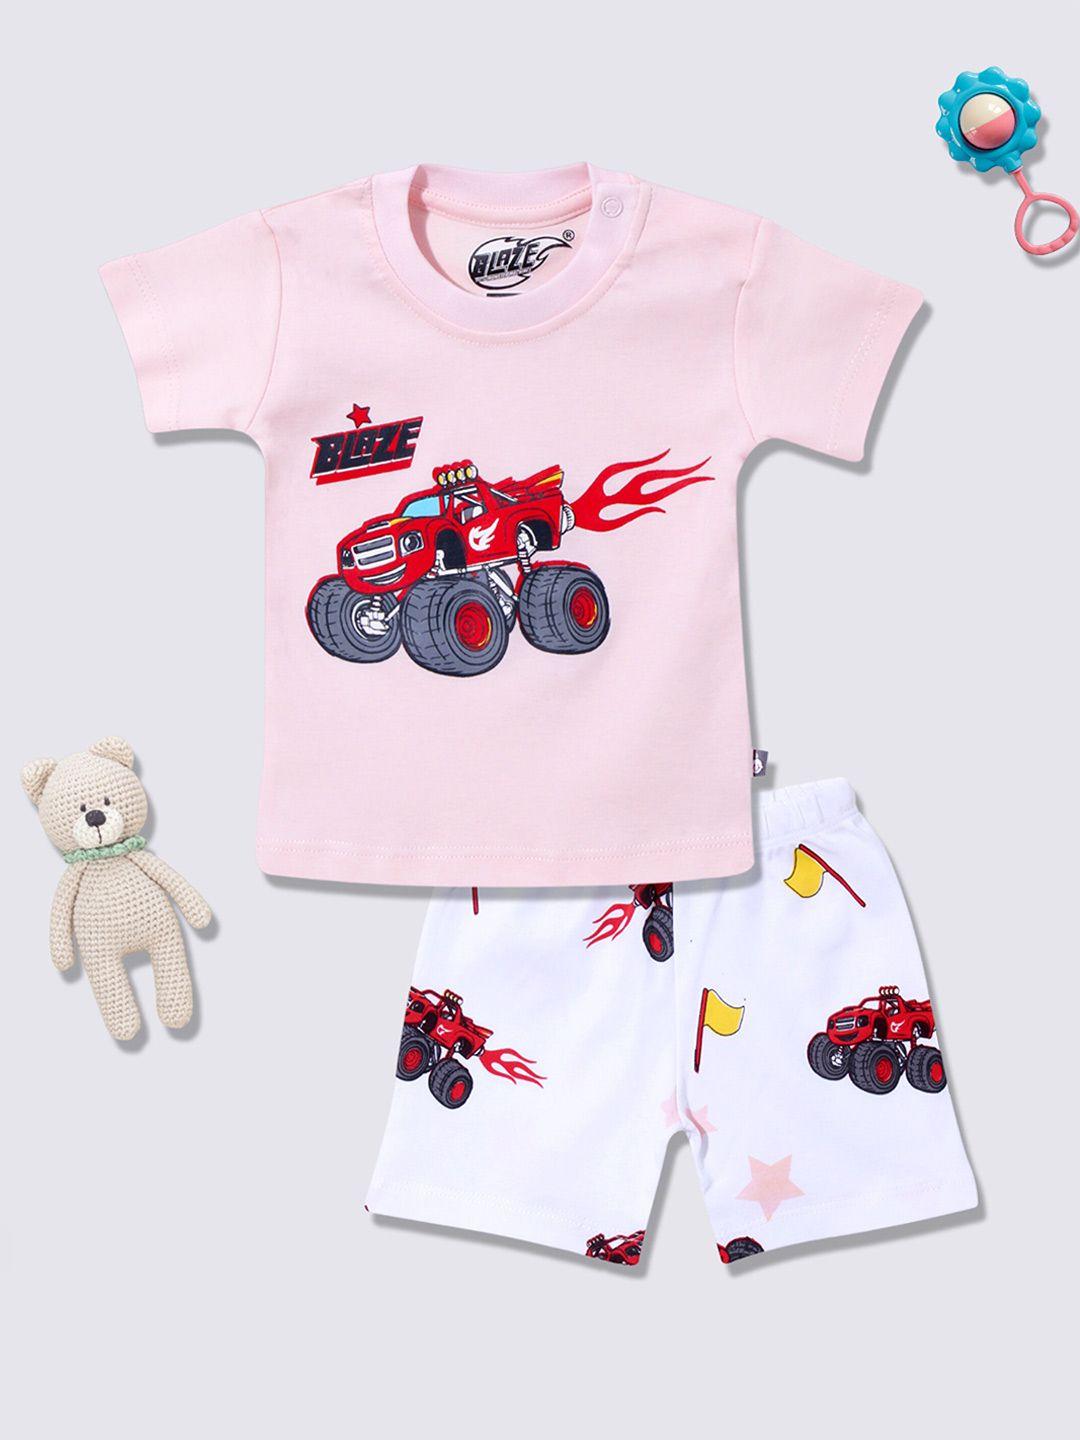 moms love infant boys printed pure cotton t-shirt with shorts